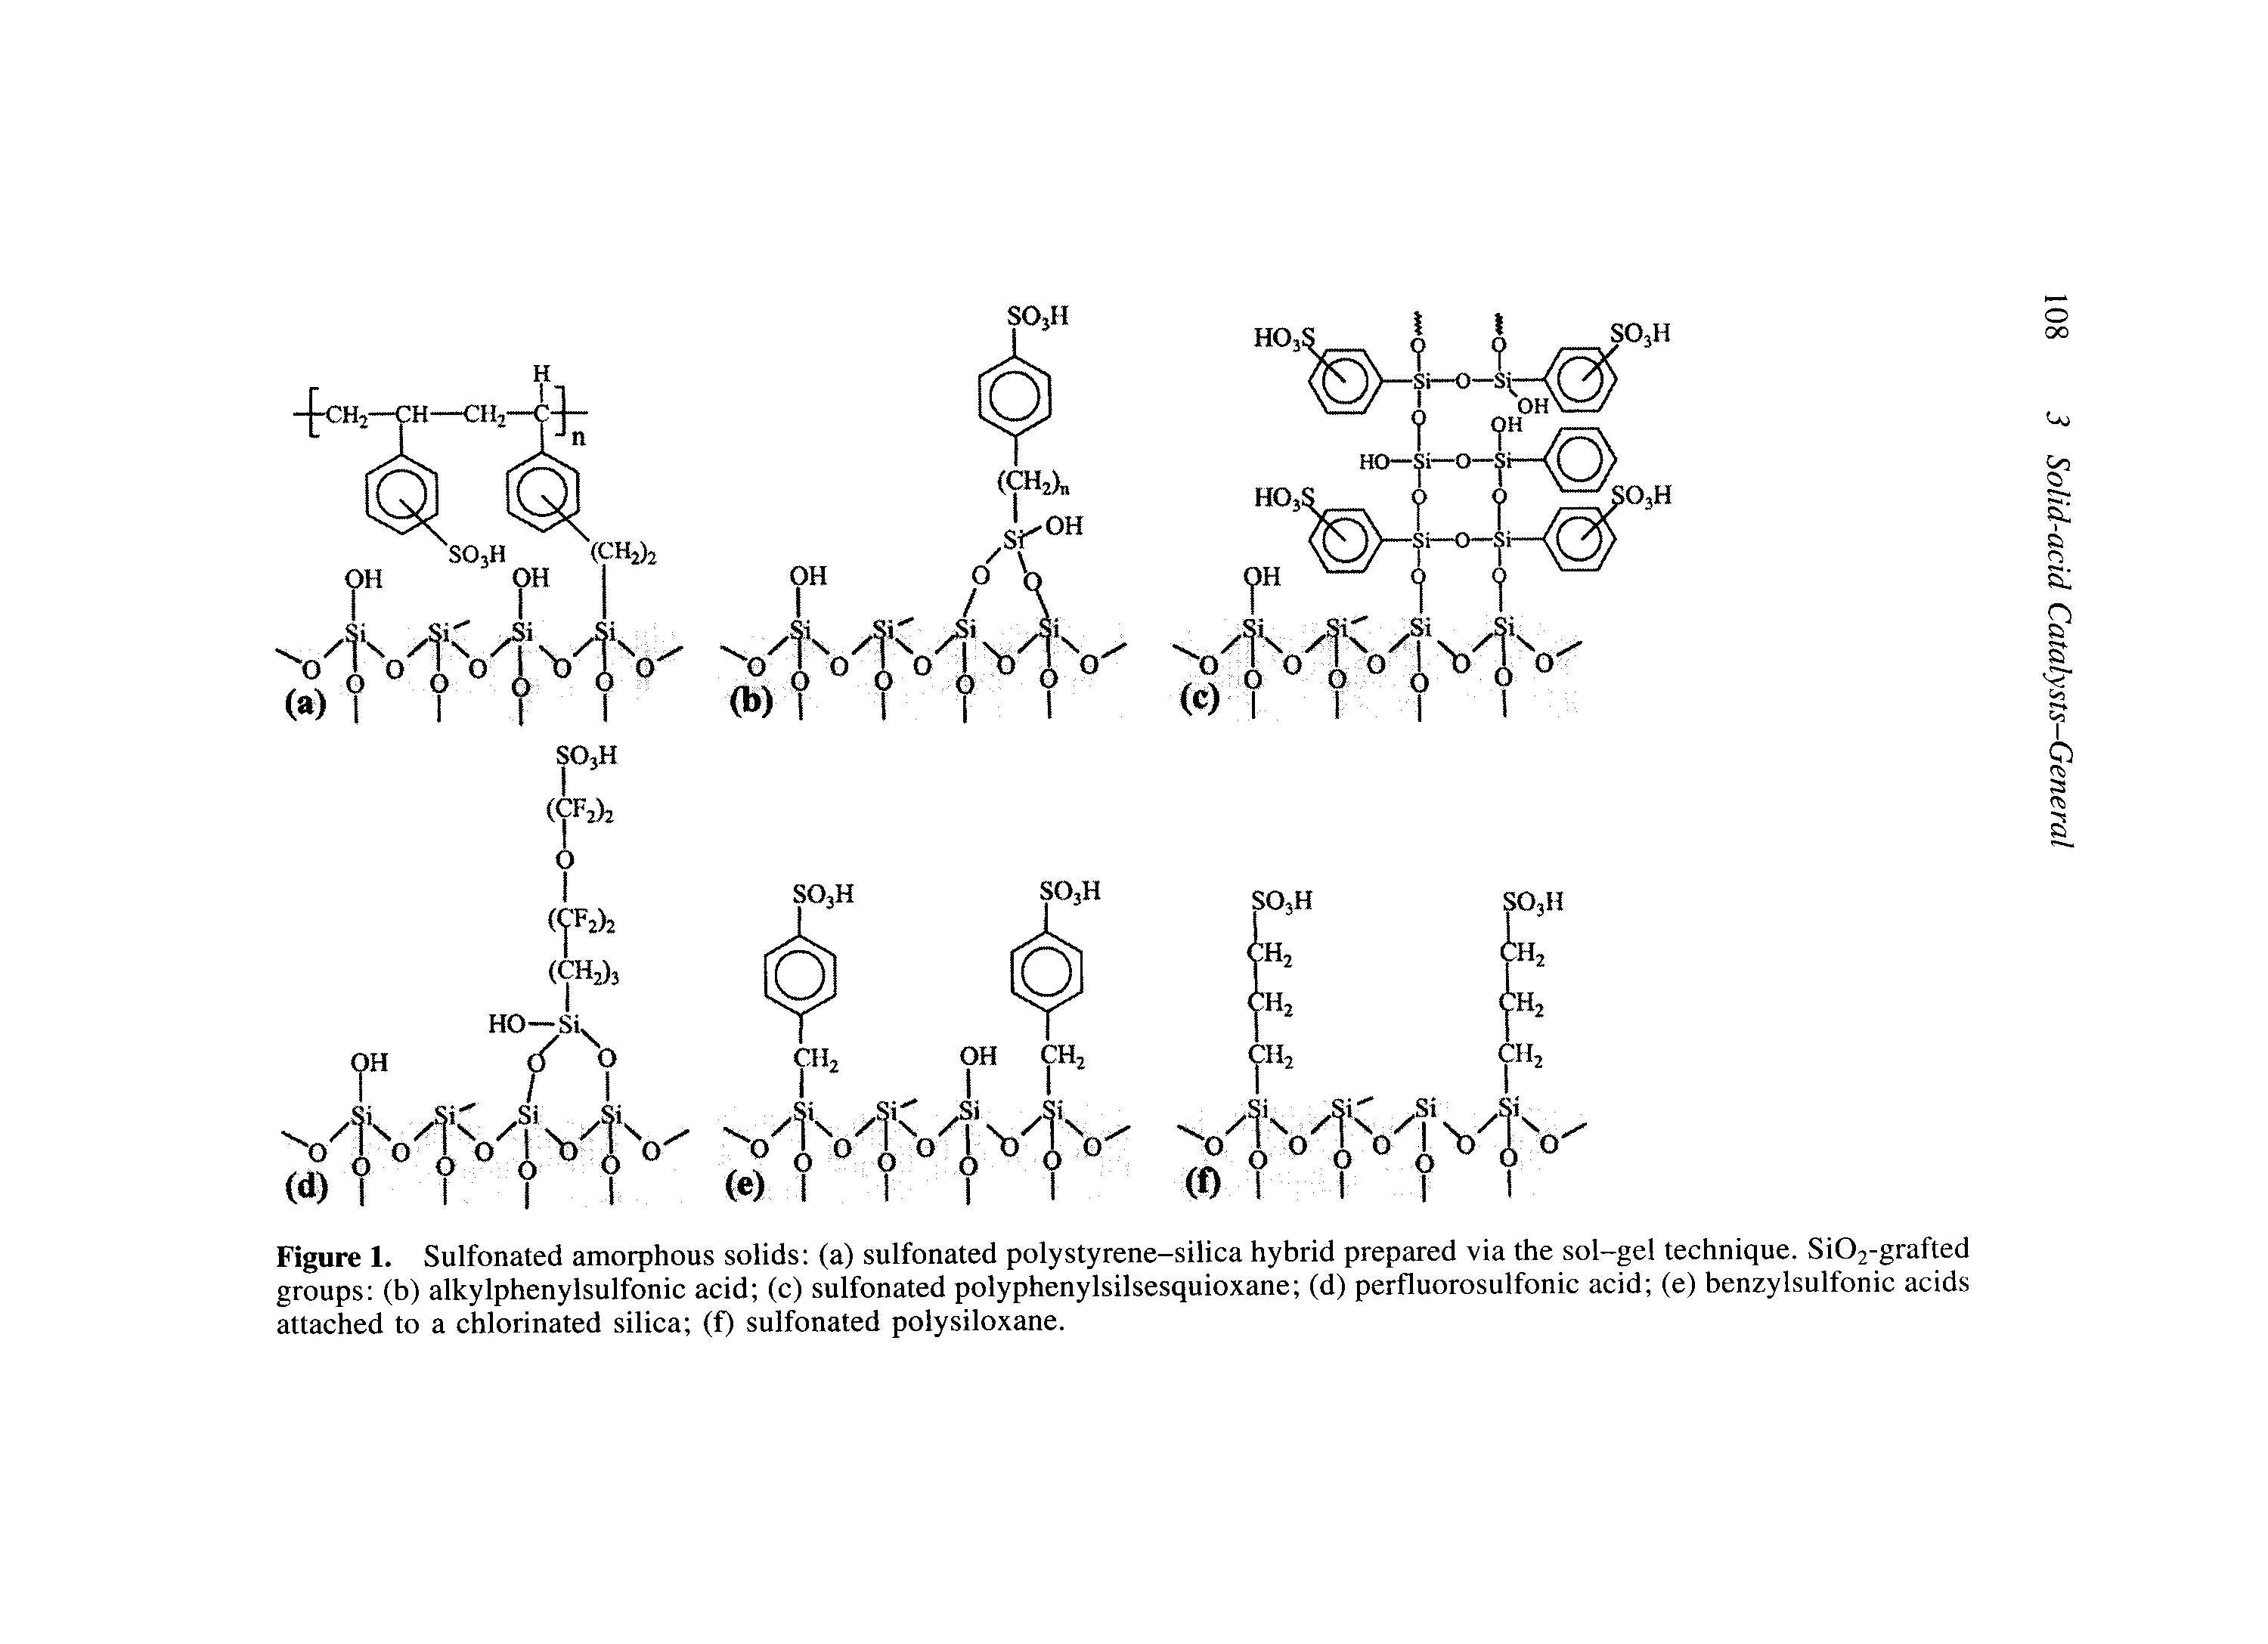 Figure 1. Sulfonated amorphous solids (a) sulfonated polystyrene-silica hybrid prepared via the sol-gel technique. Si02-grafted groups (b) alkylphenylsulfonic acid (c) sulfonated polyphenylsilsesquioxane (d) perfluorosulfonic acid (e) benzylsulfonic acids attached to a chlorinated silica (f) sulfonated polysiloxane.